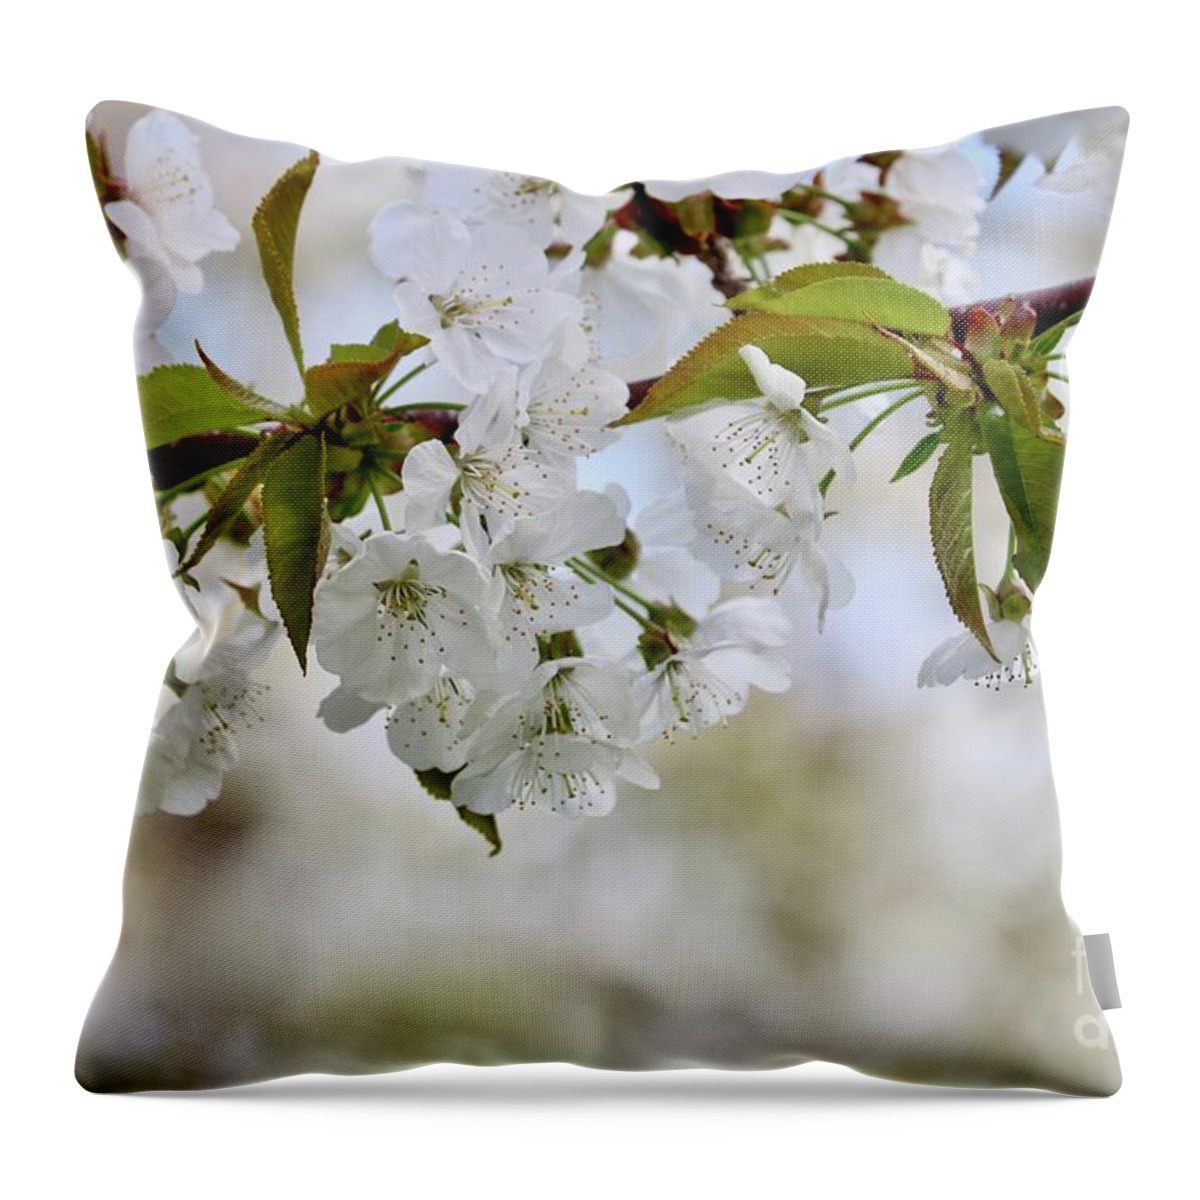 White Cherry Blossoms Throw Pillow featuring the photograph Sweet White Cherry Blossoms by Carol Groenen